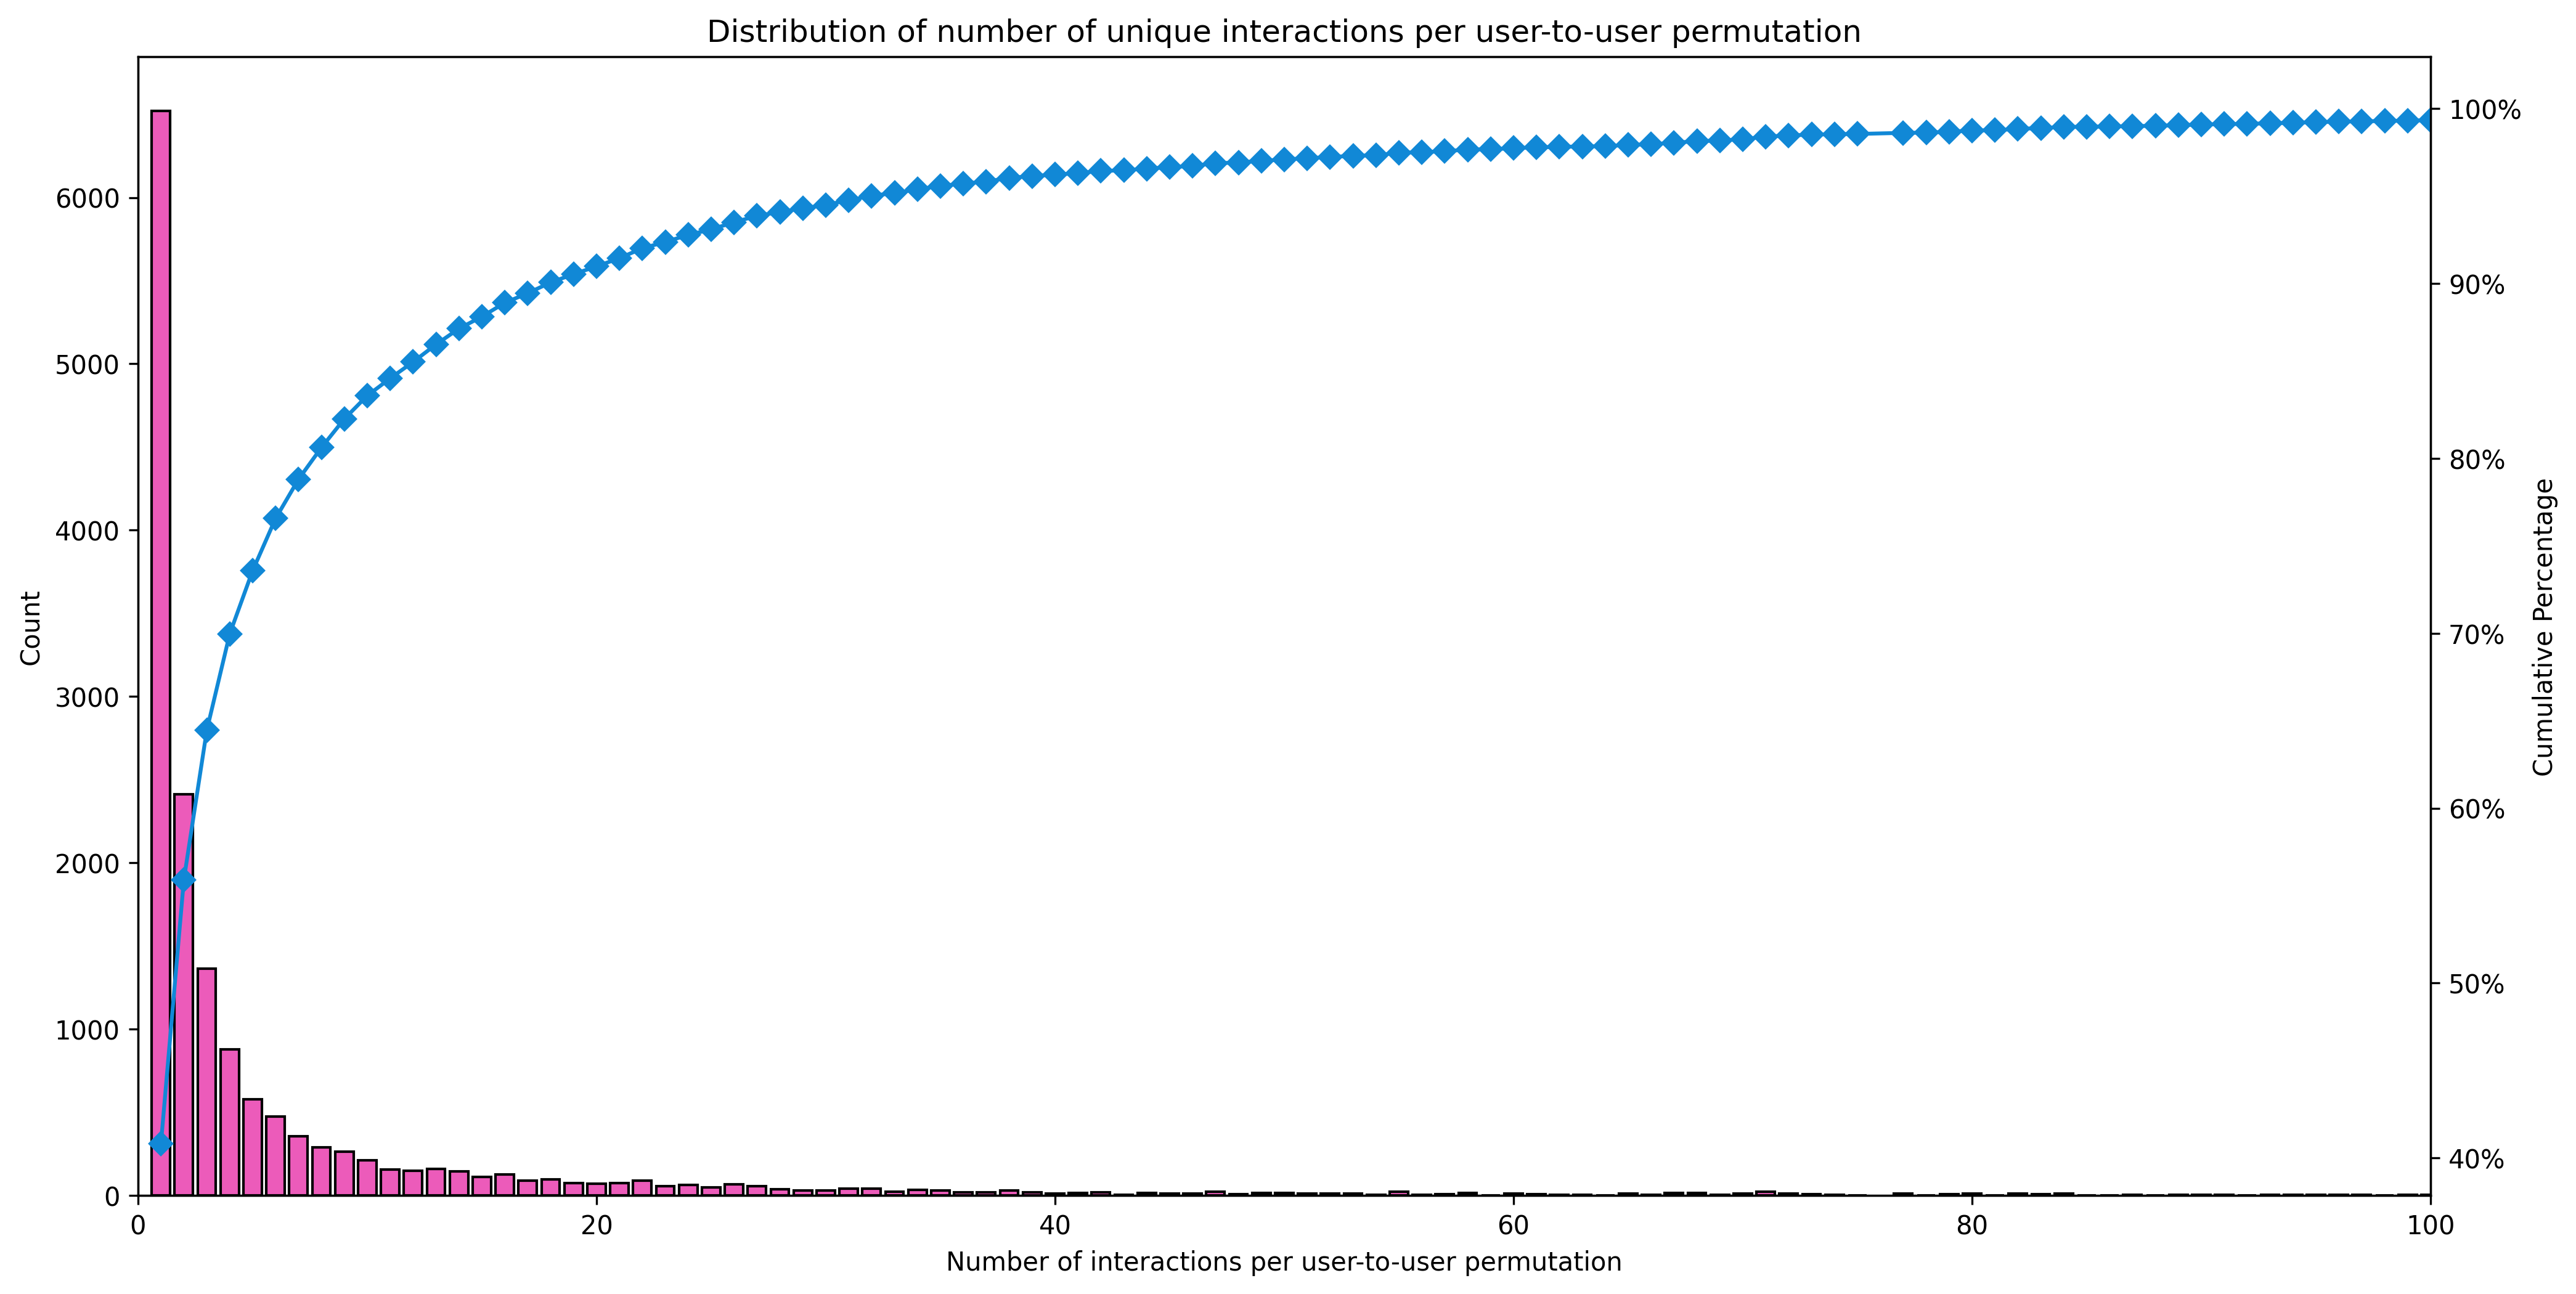 Distribution of number of unique interactions per user-to-user permutation